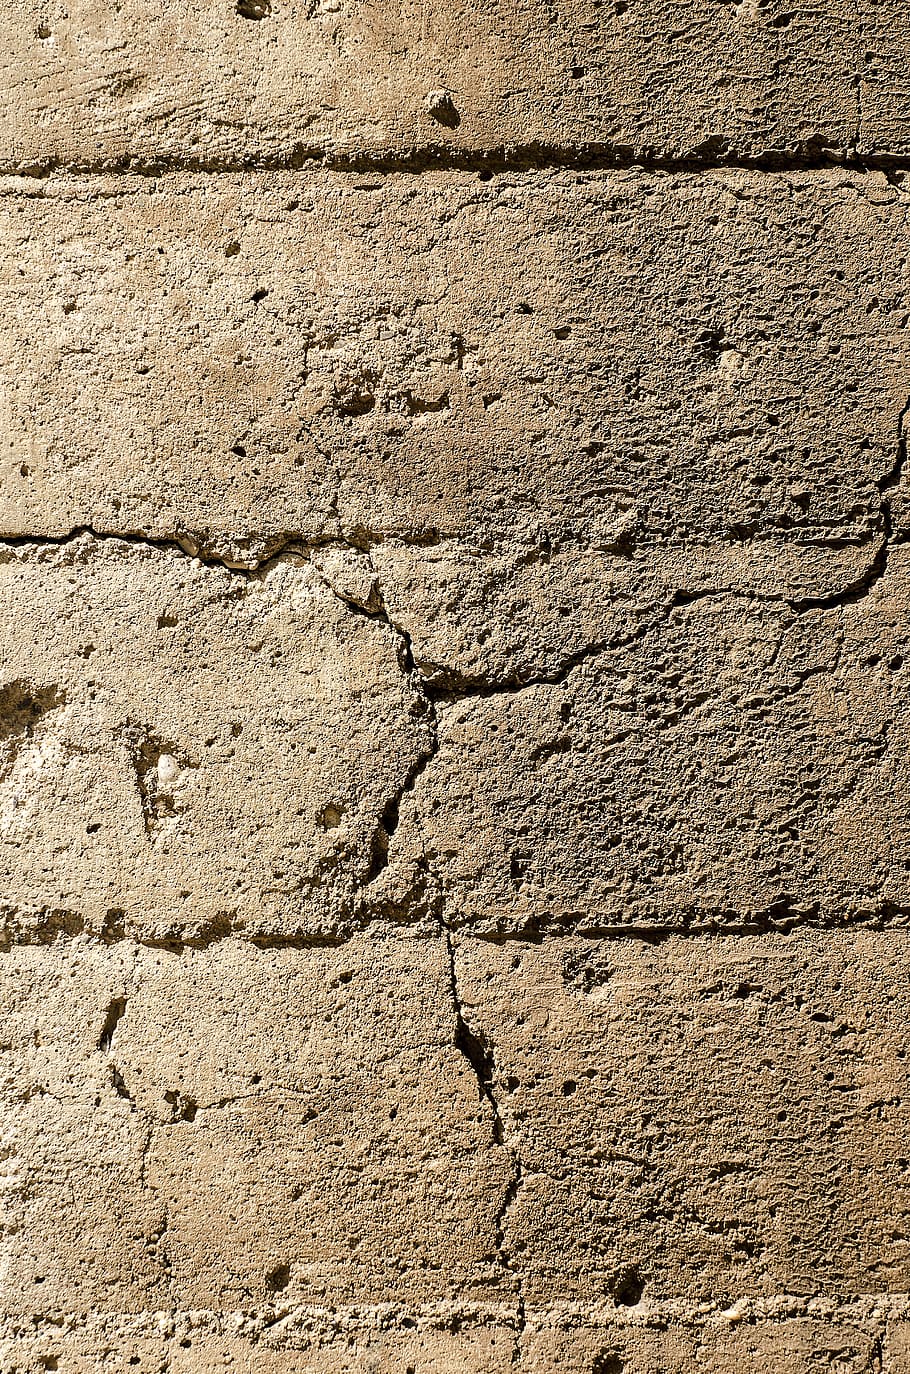 cement, texture, background, wall, cement wall, bricks, cracked, cracks, material, crackle